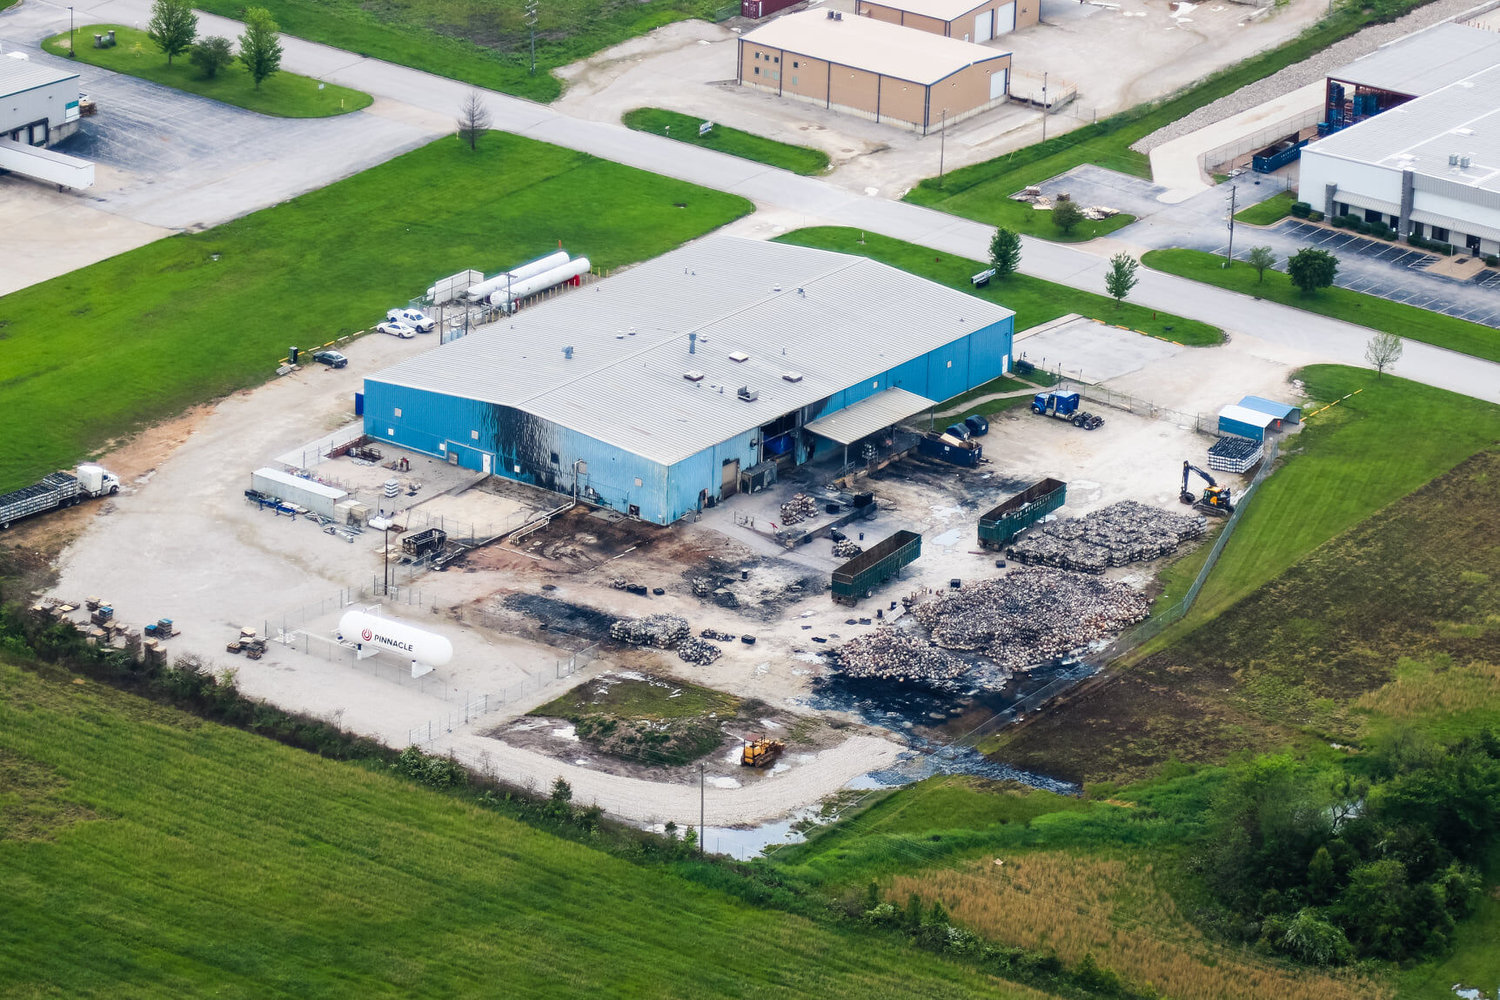 The aftermath of the fire at the Kosan Crisplant/McKeen site on South Prairie Lane. The report details two burned semi-trailers and a a freight vehicle.